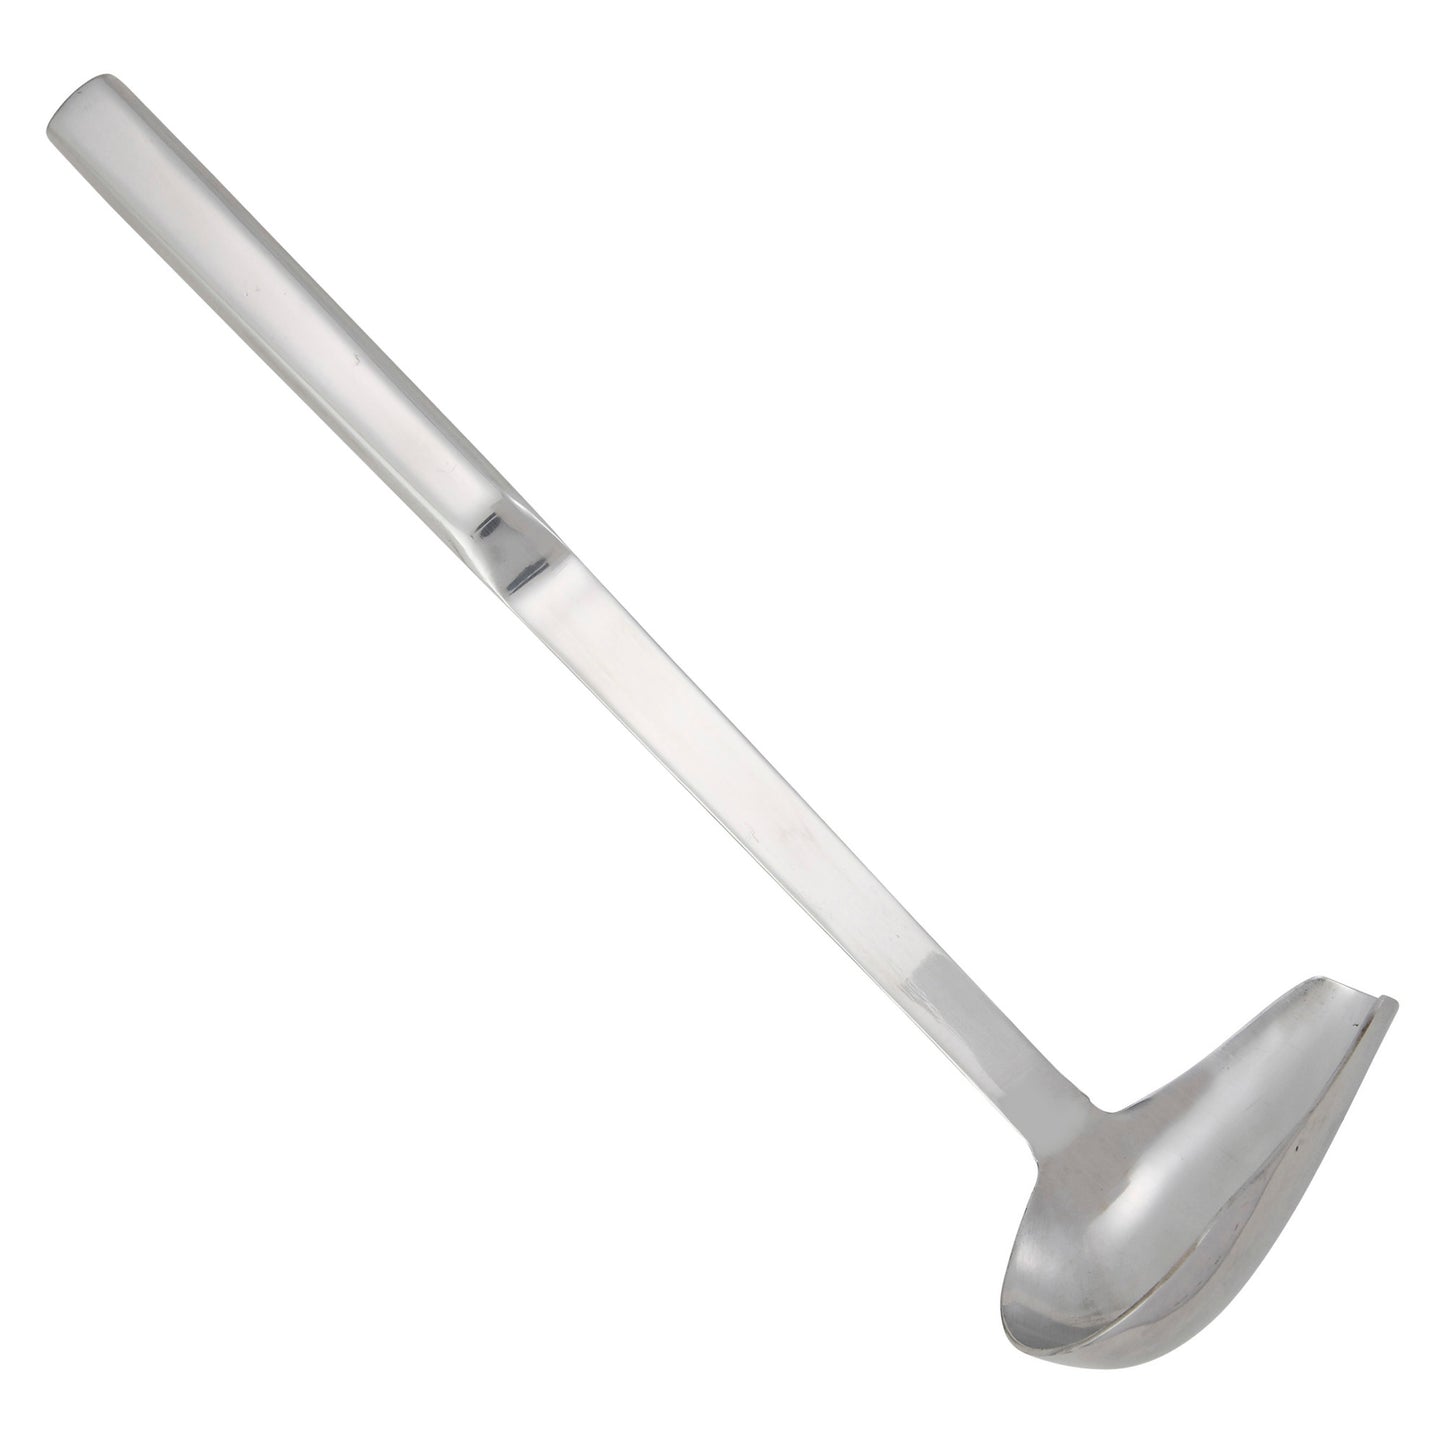 BW-SP1 - 1 oz Spout Ladle, Hollow Handle, Stainless Steel